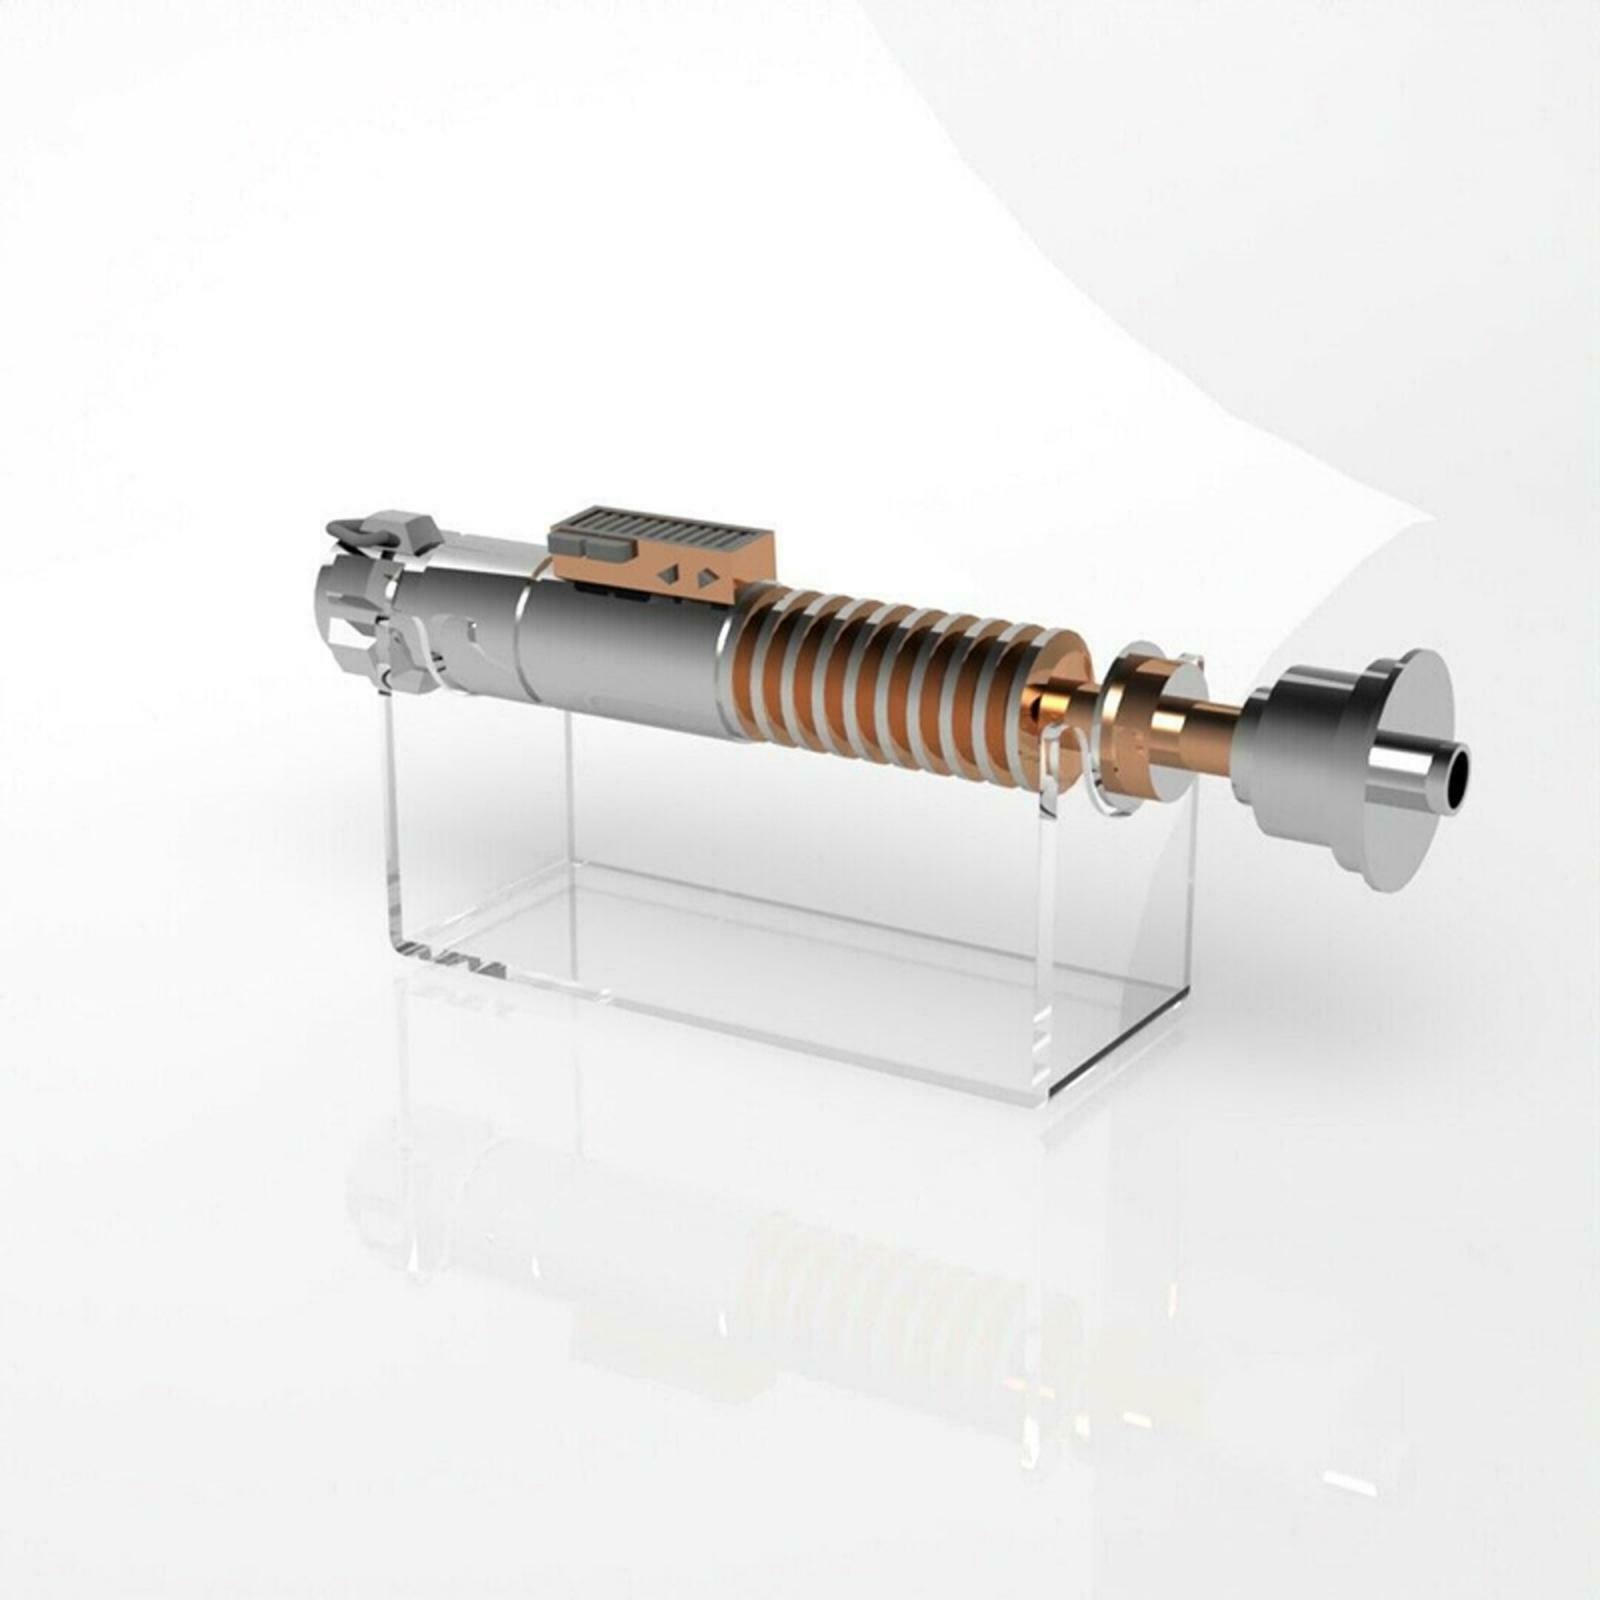 Clear Acrylic Display Stand Sword Lightsaber Holder for Collection 17x7x8cm